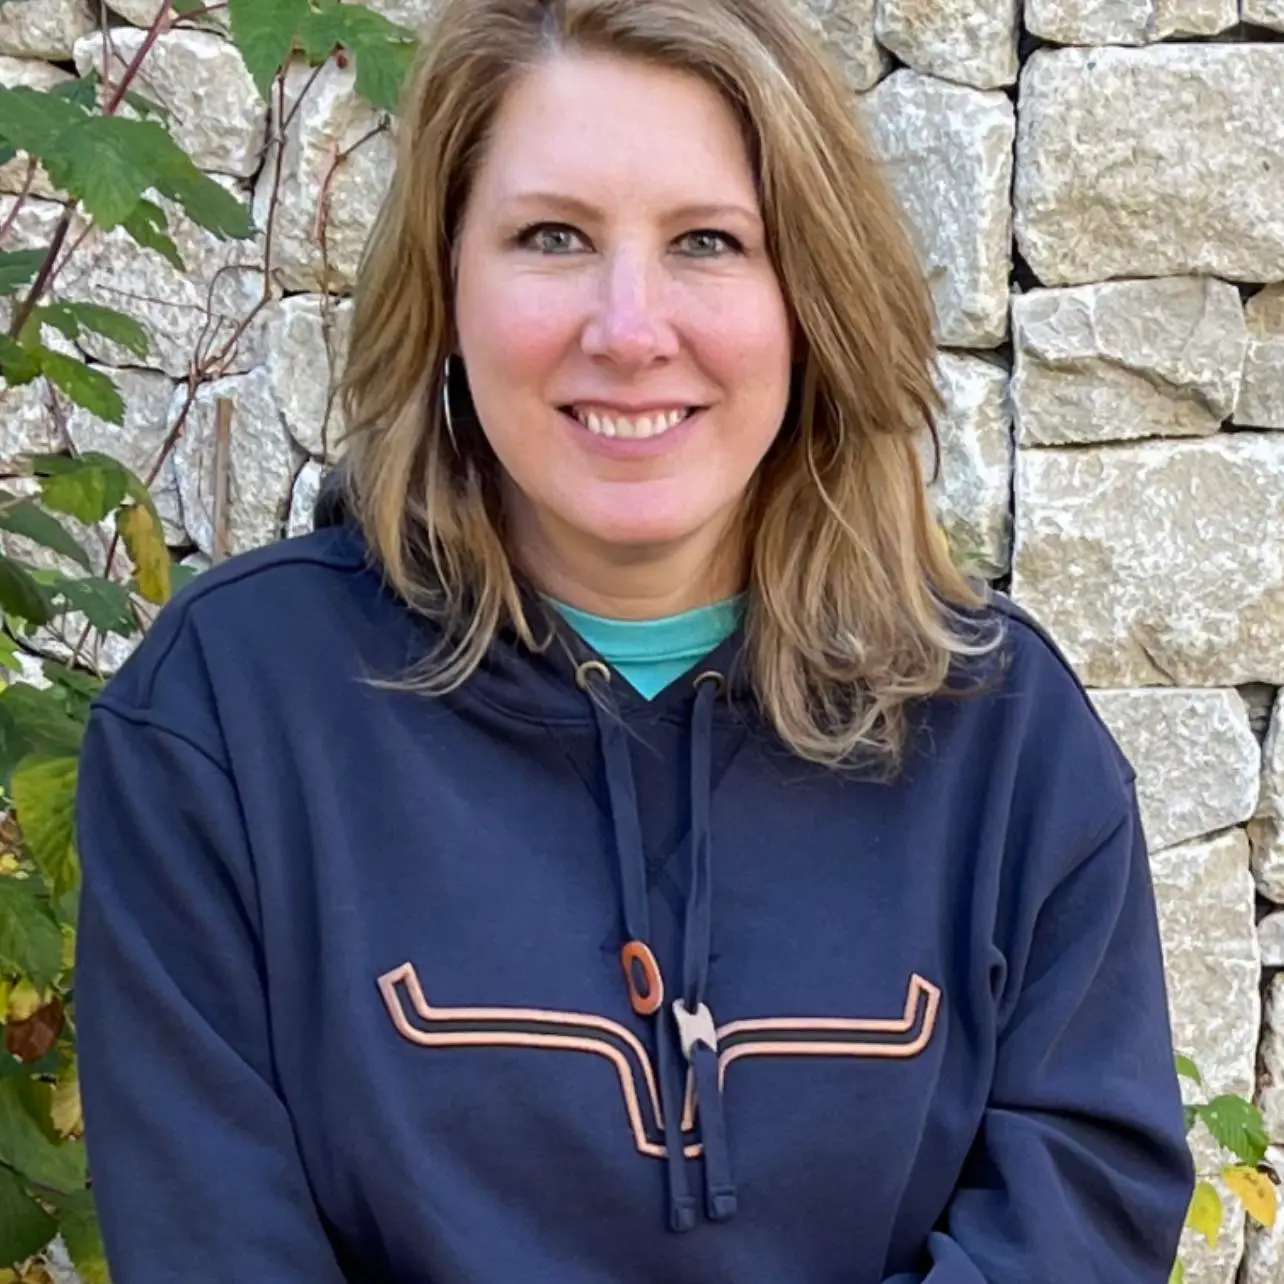 Tonya Day owner of Gather Gift Shop wearing a hoodie and standing outdoors in front of a stone wall